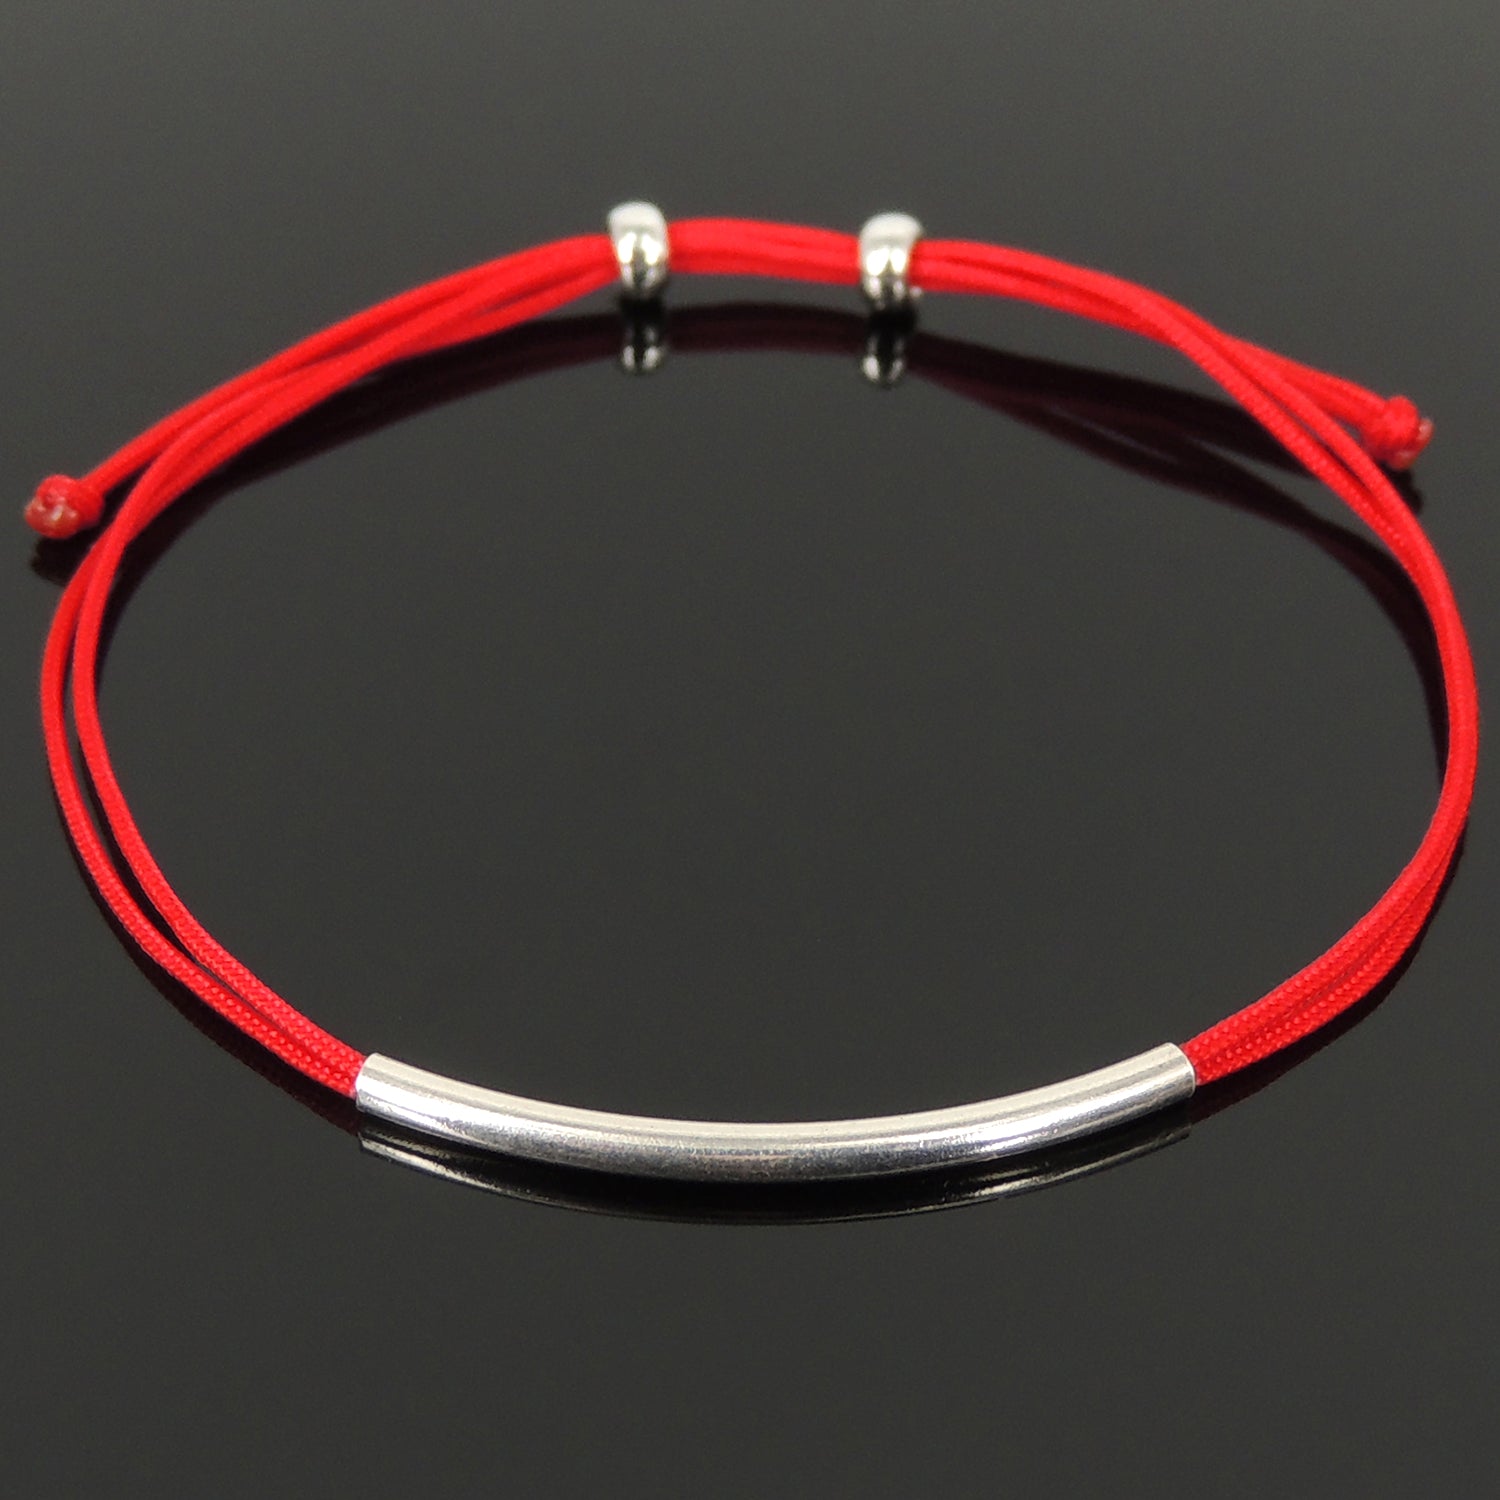 Lucky Chinese Red String Braided Bracelet, Minimal Jewelry, Elegant Statement, Genuine 925 Sterling Silver Slim Charm and Beads, Easily Adjustable for Multiple Sizes